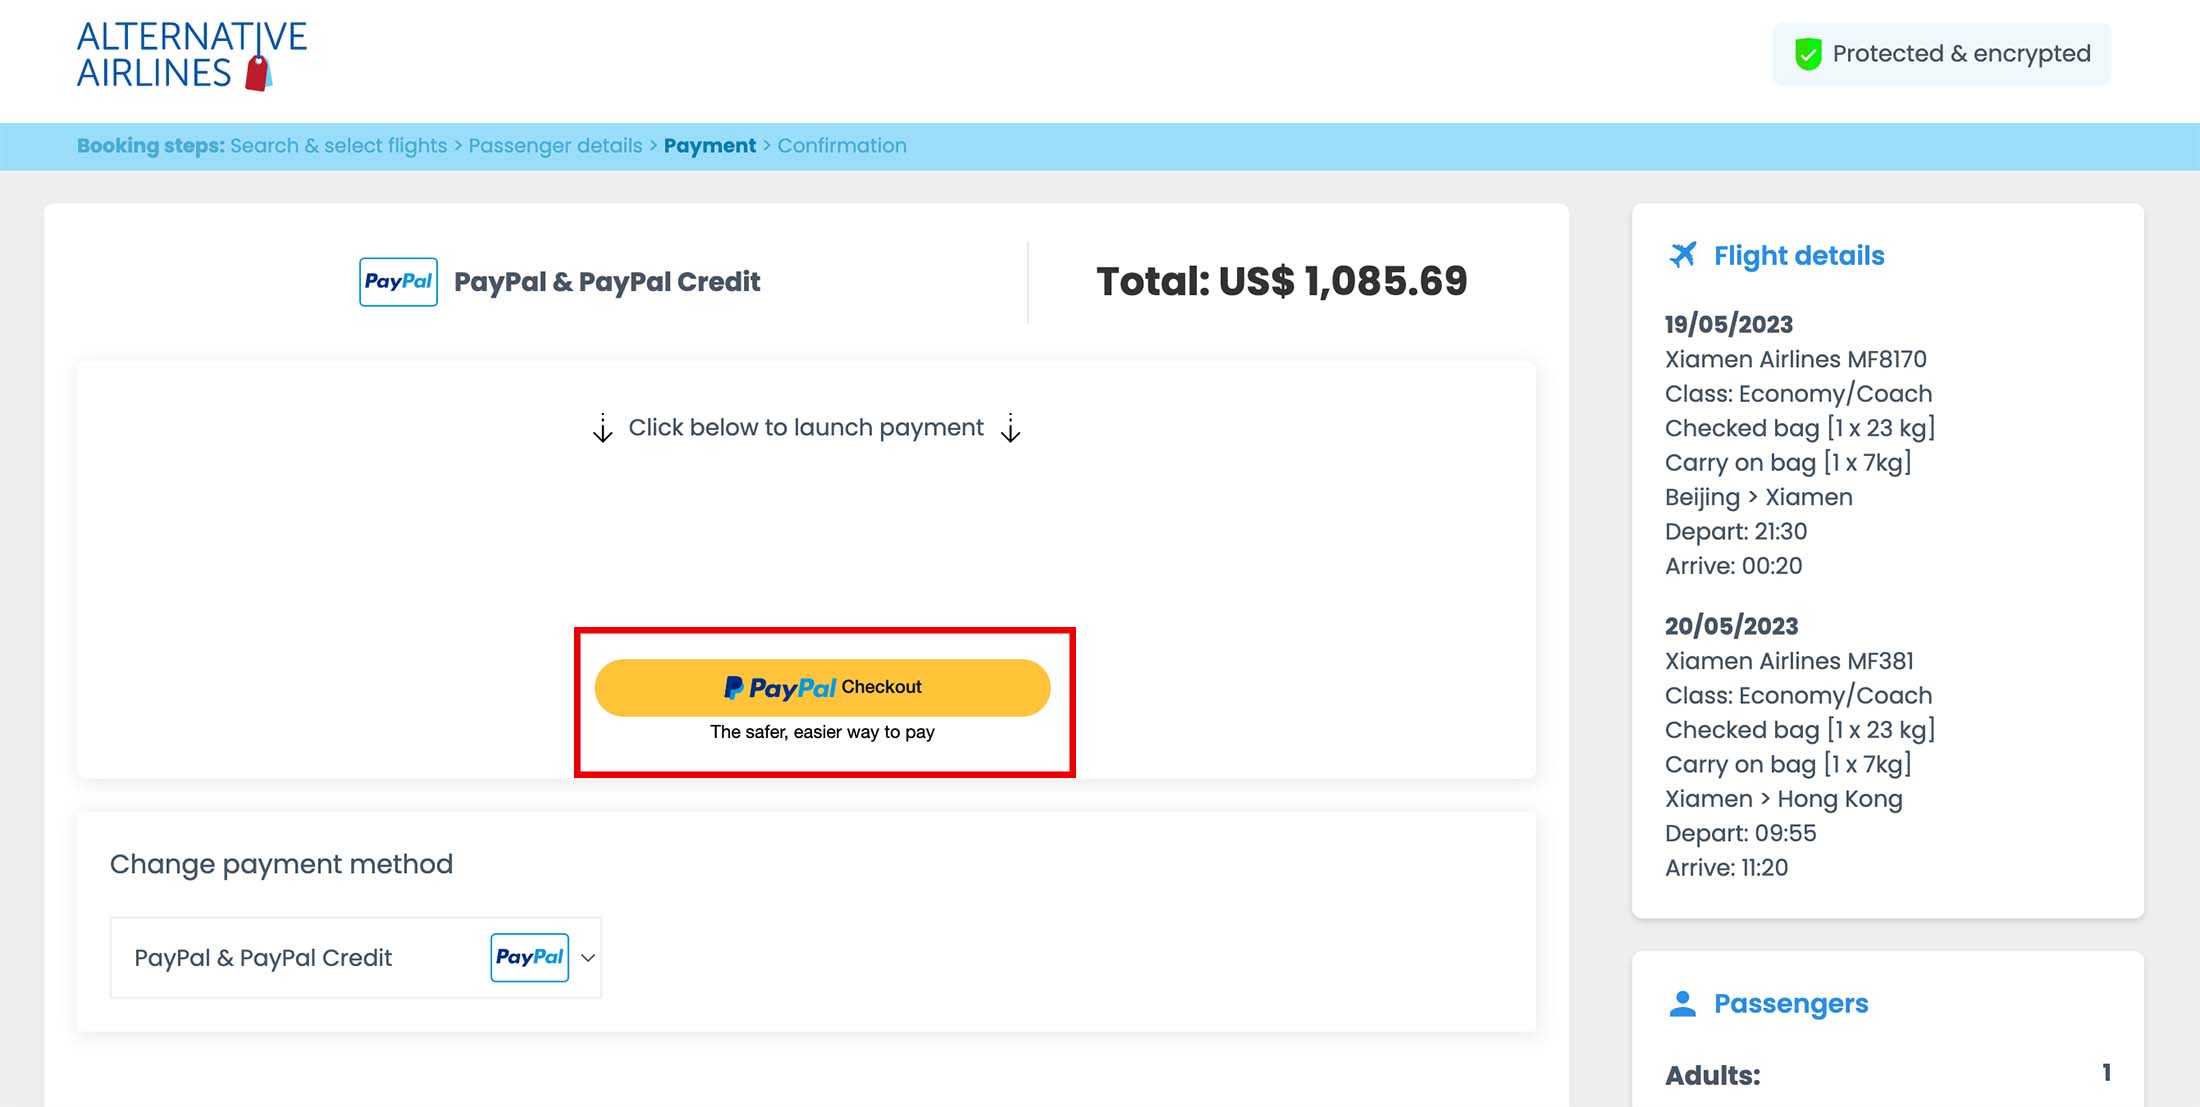 Step 5 - Select the 'PayPal checkout' button